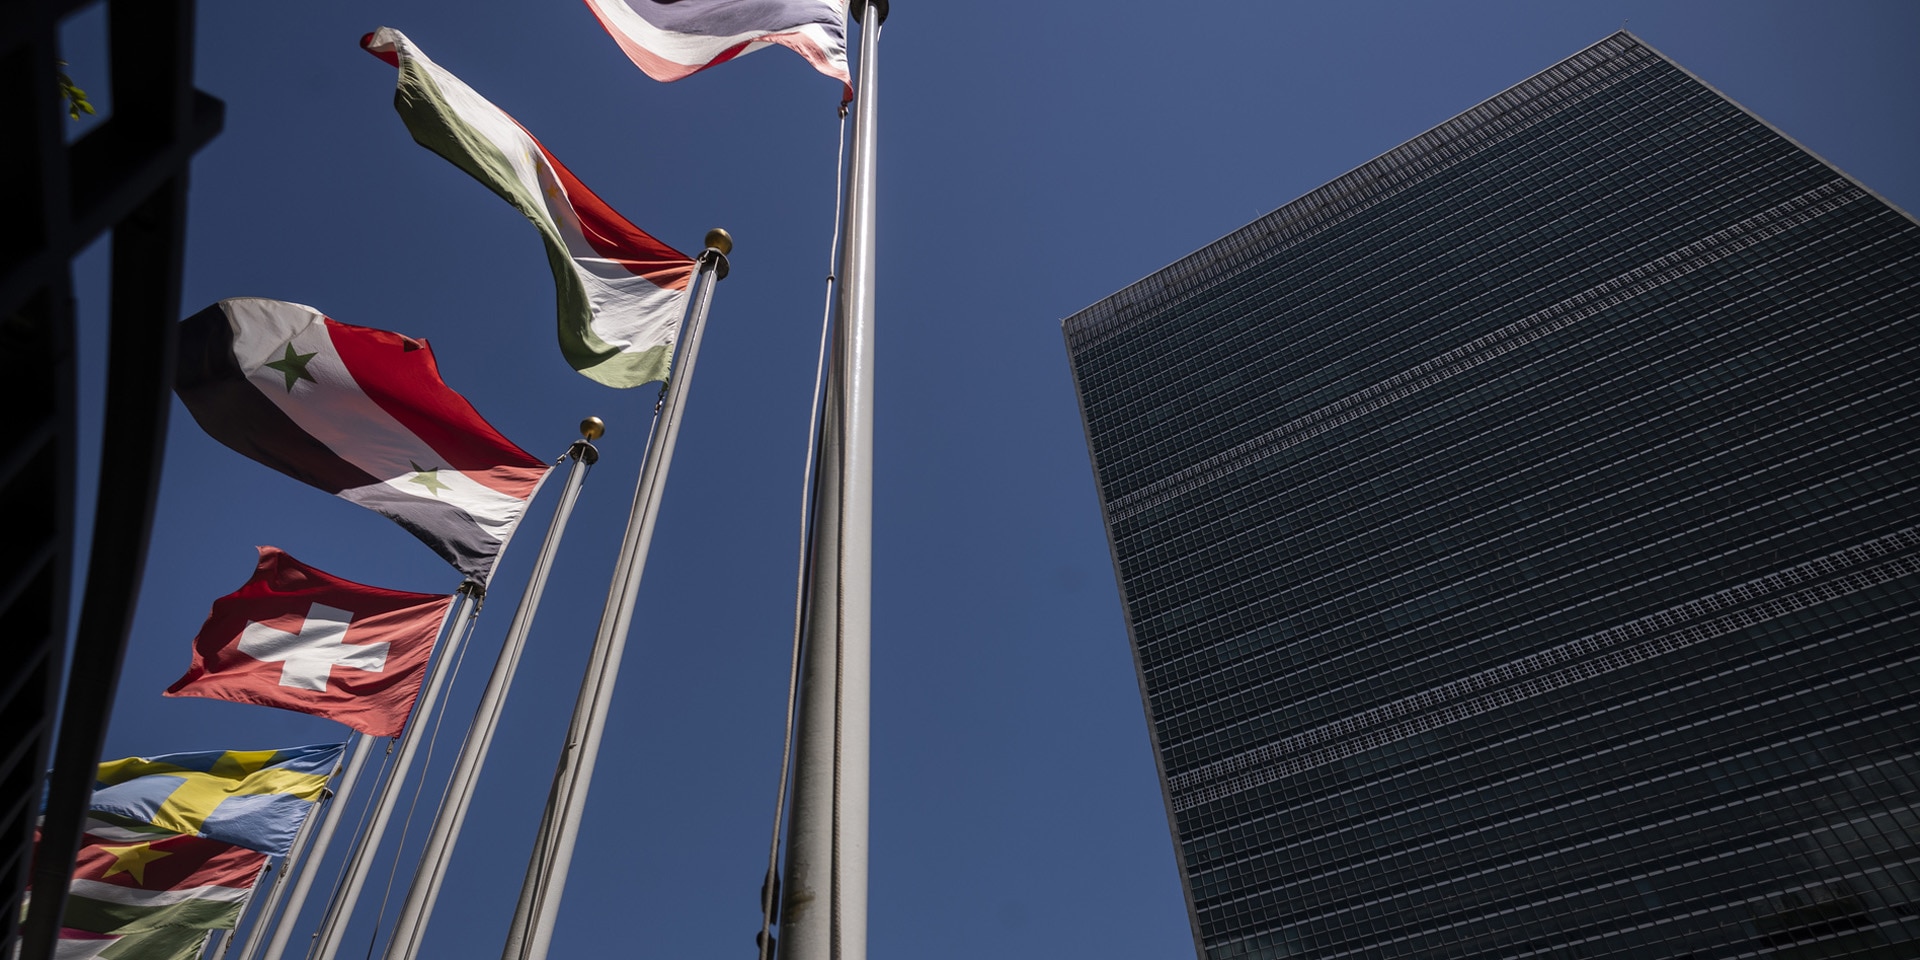 The Swiss flag flies next to the flags of the other UN member states in front of the UN headquarters in New York.